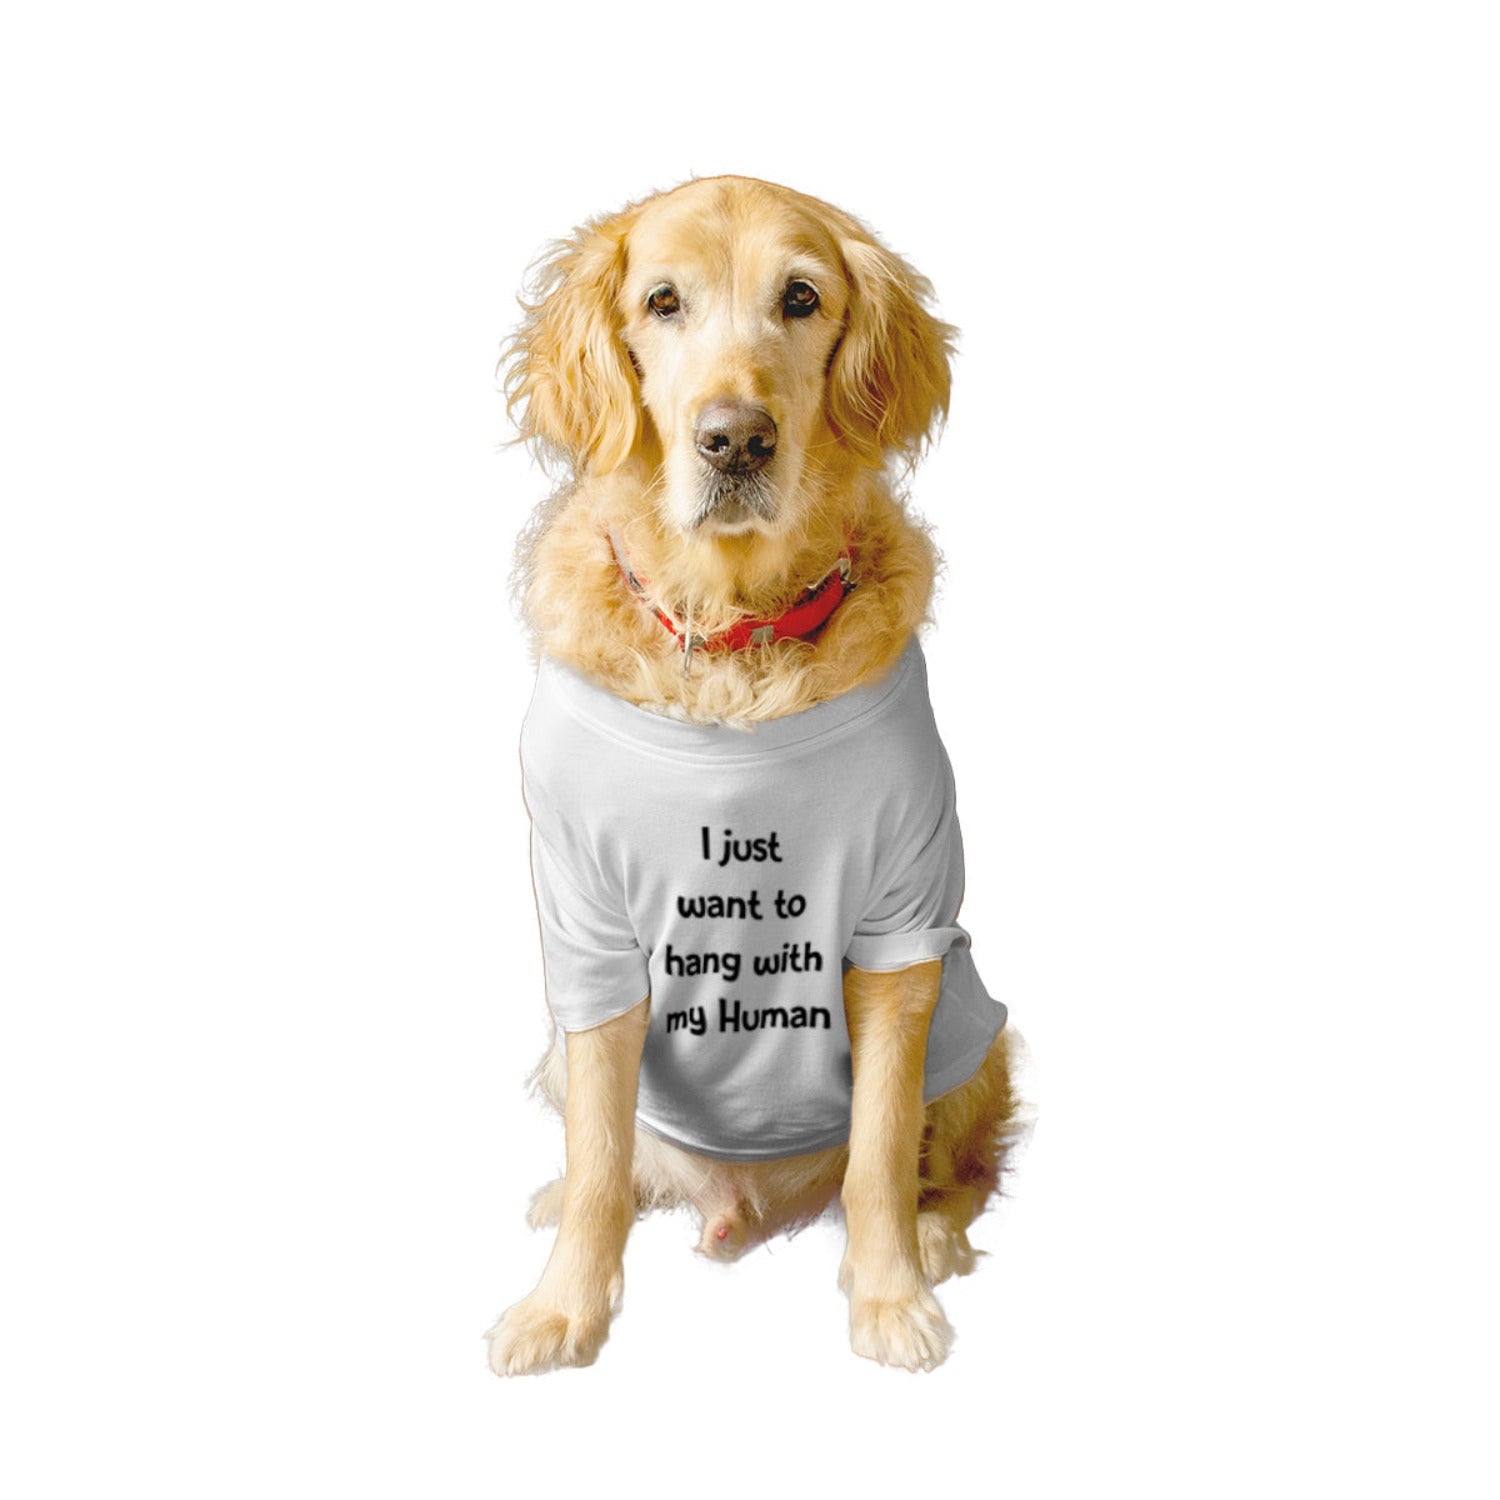 Ruse / i-just-want-to-hang-with-my-human-crew-neck-dog-tee / White